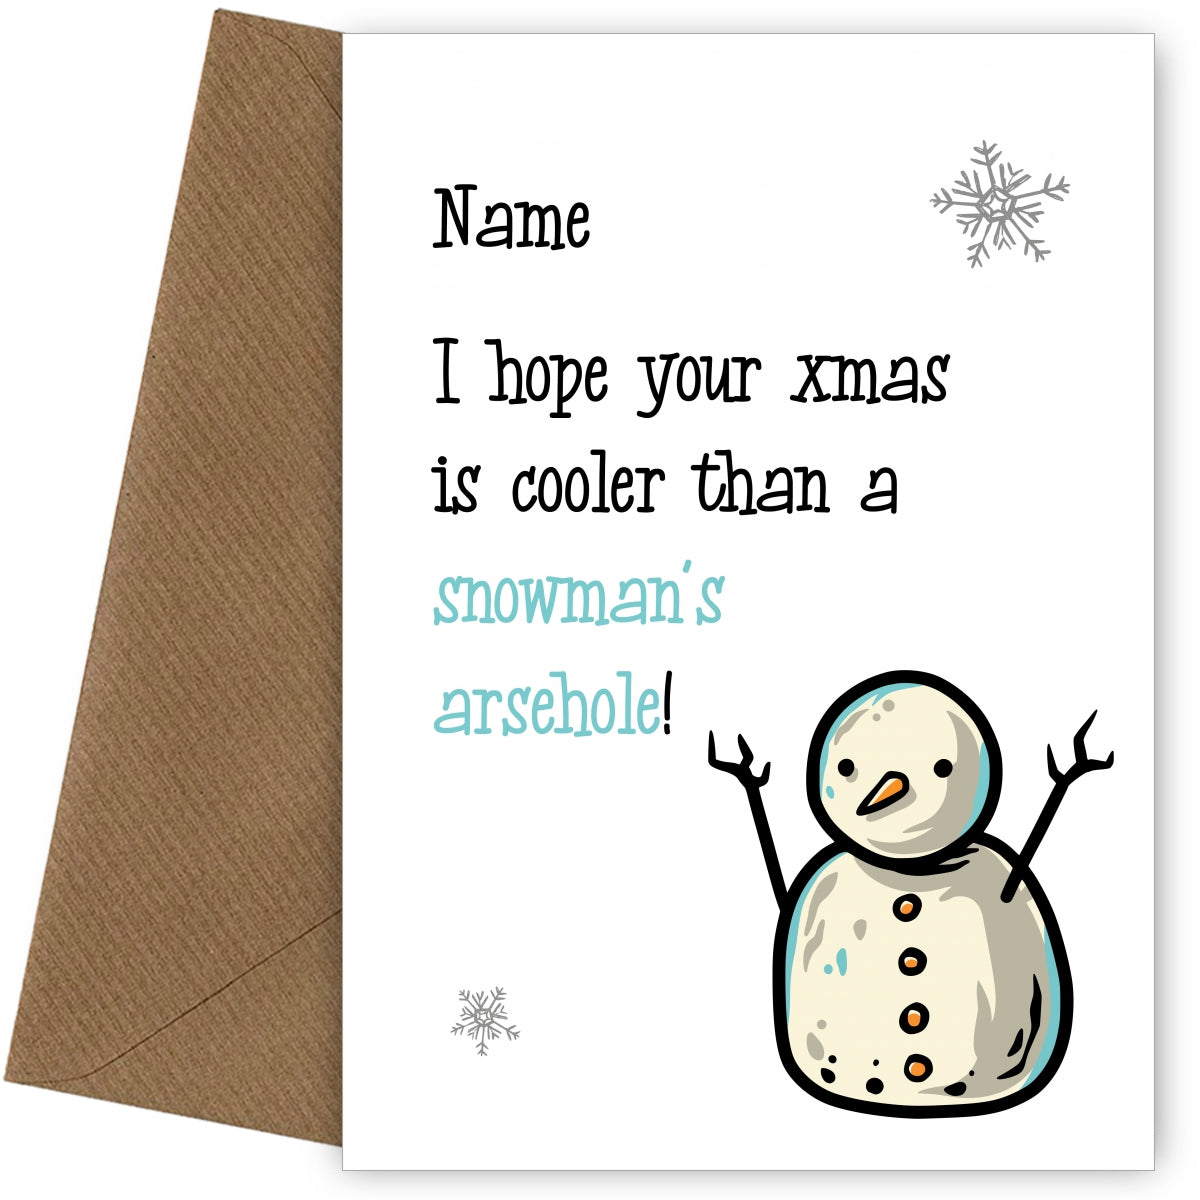 Funny Christmas Cards for Teens - Cooler than Snowman's A*sehole Card